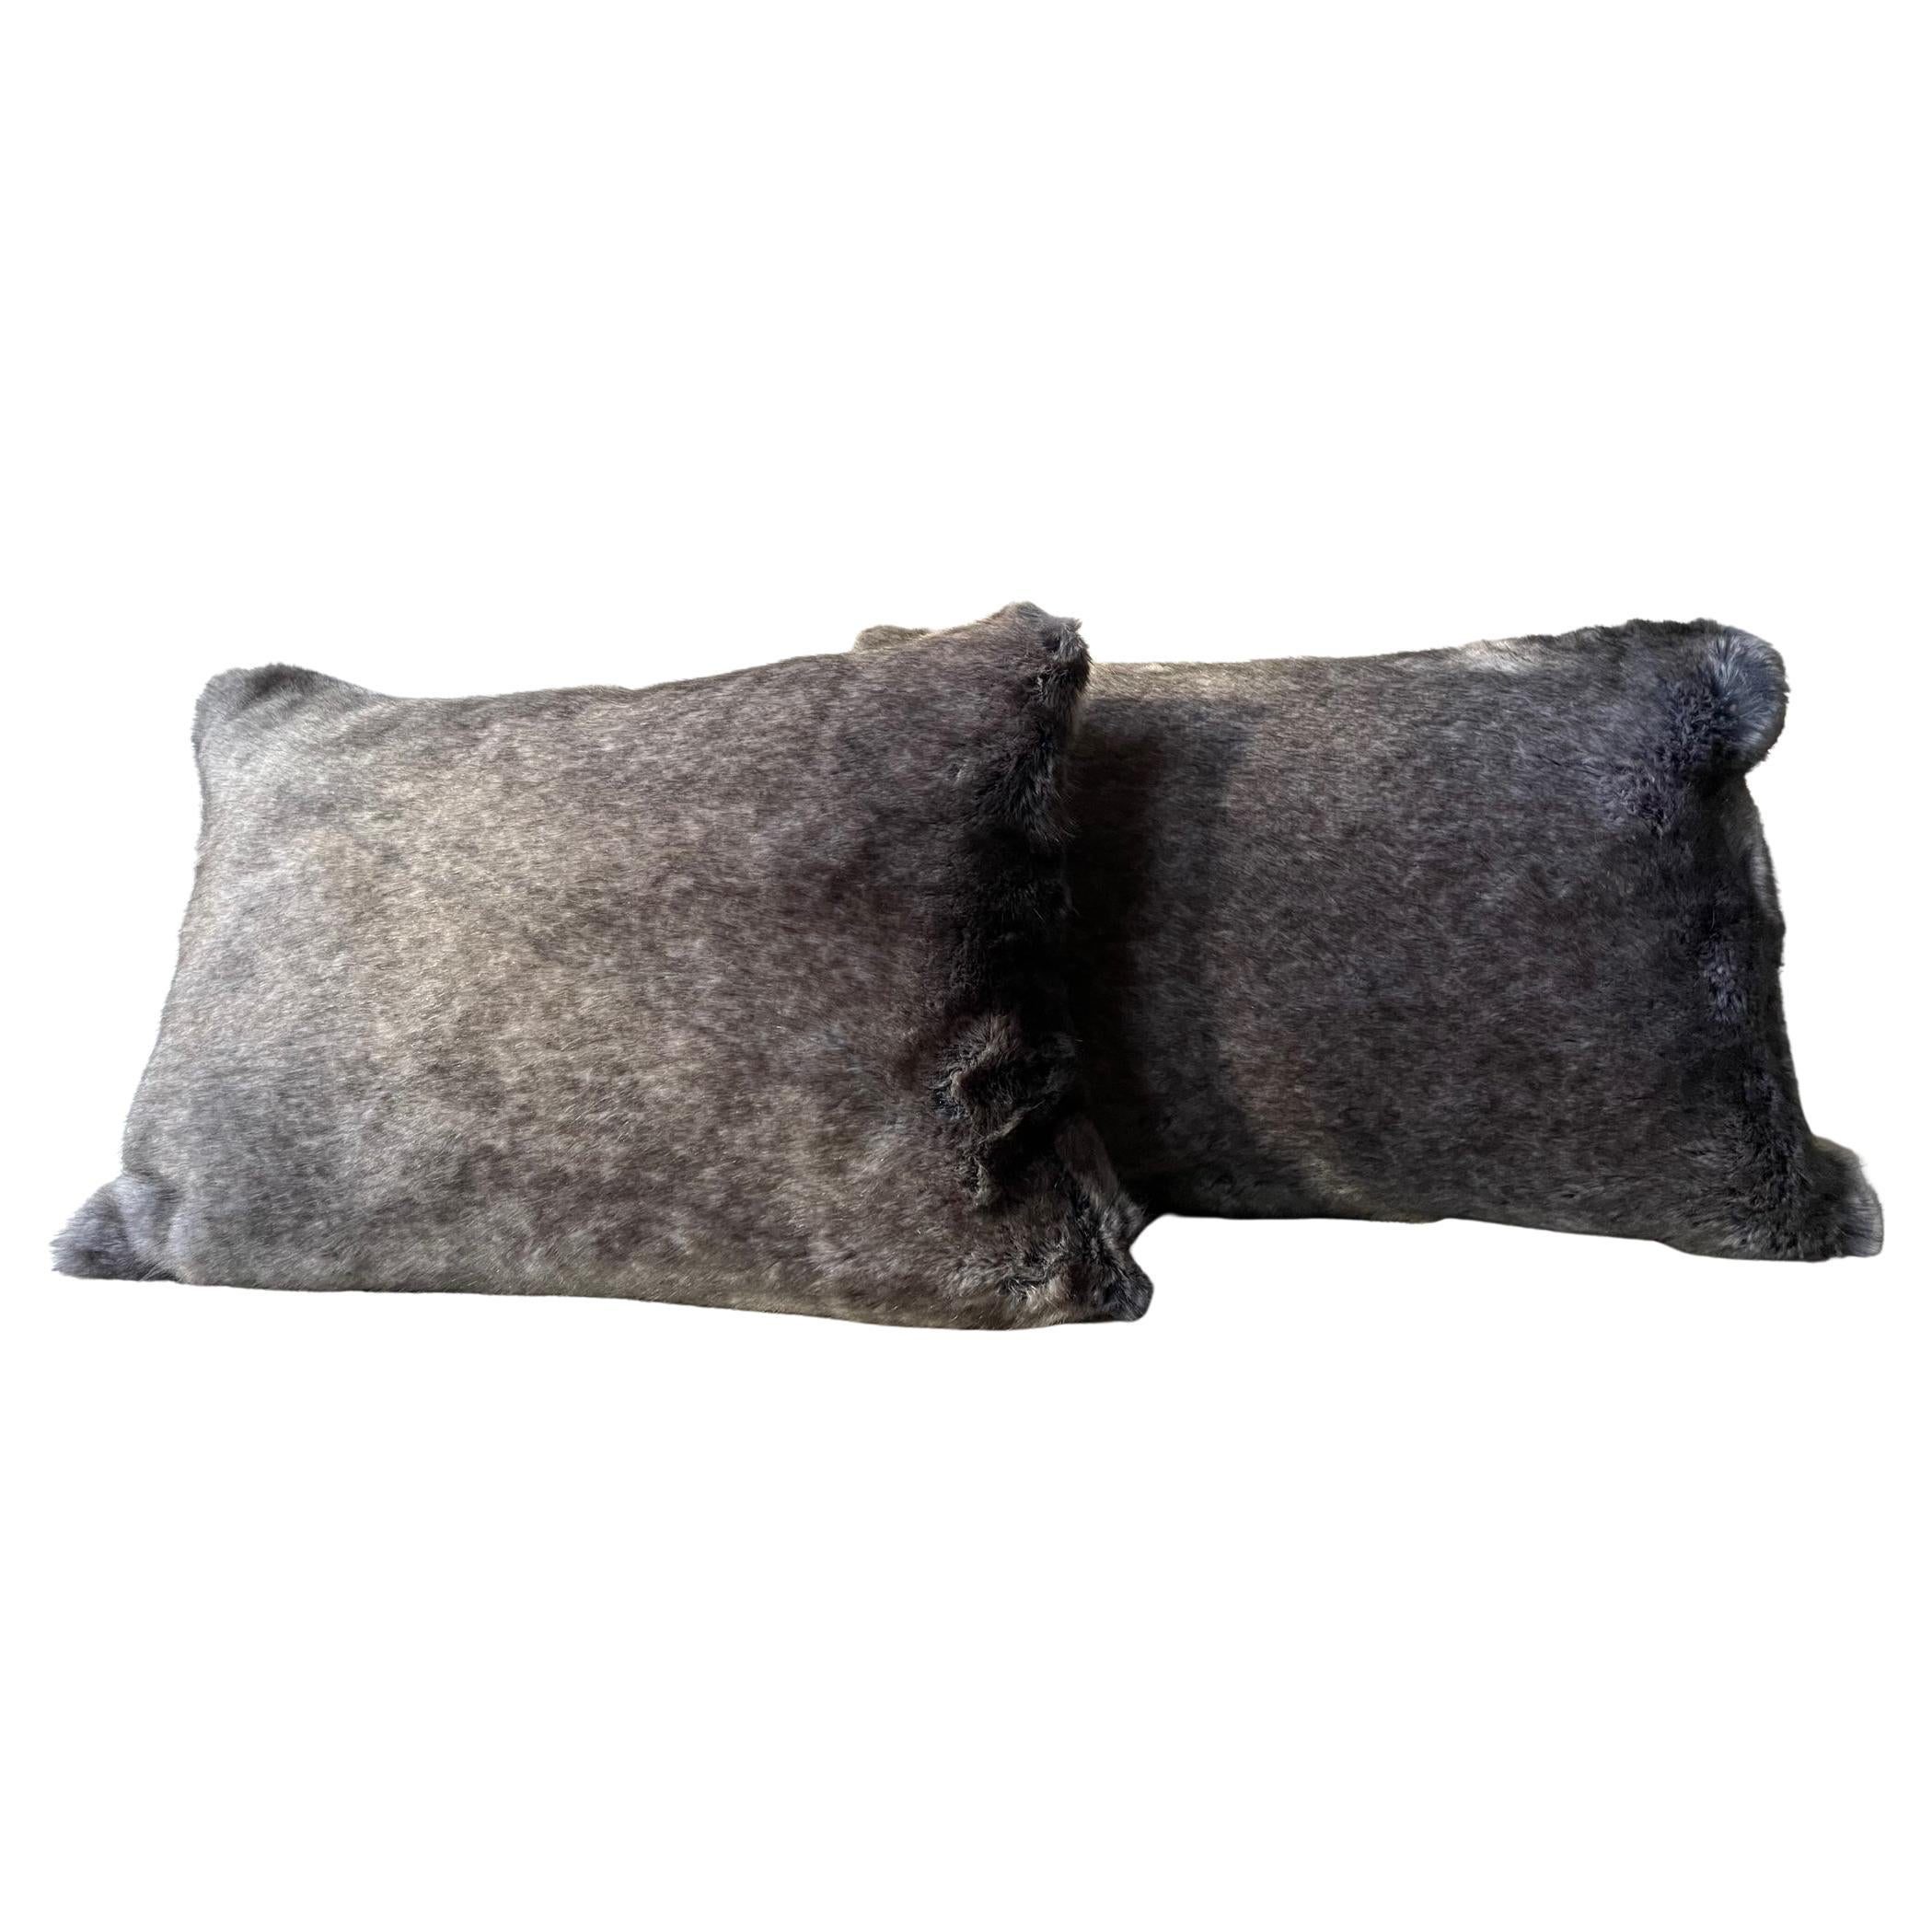 Faux Fur Cushions Colour Grey Melange with Col. Grey at the Back Oblong Shape For Sale